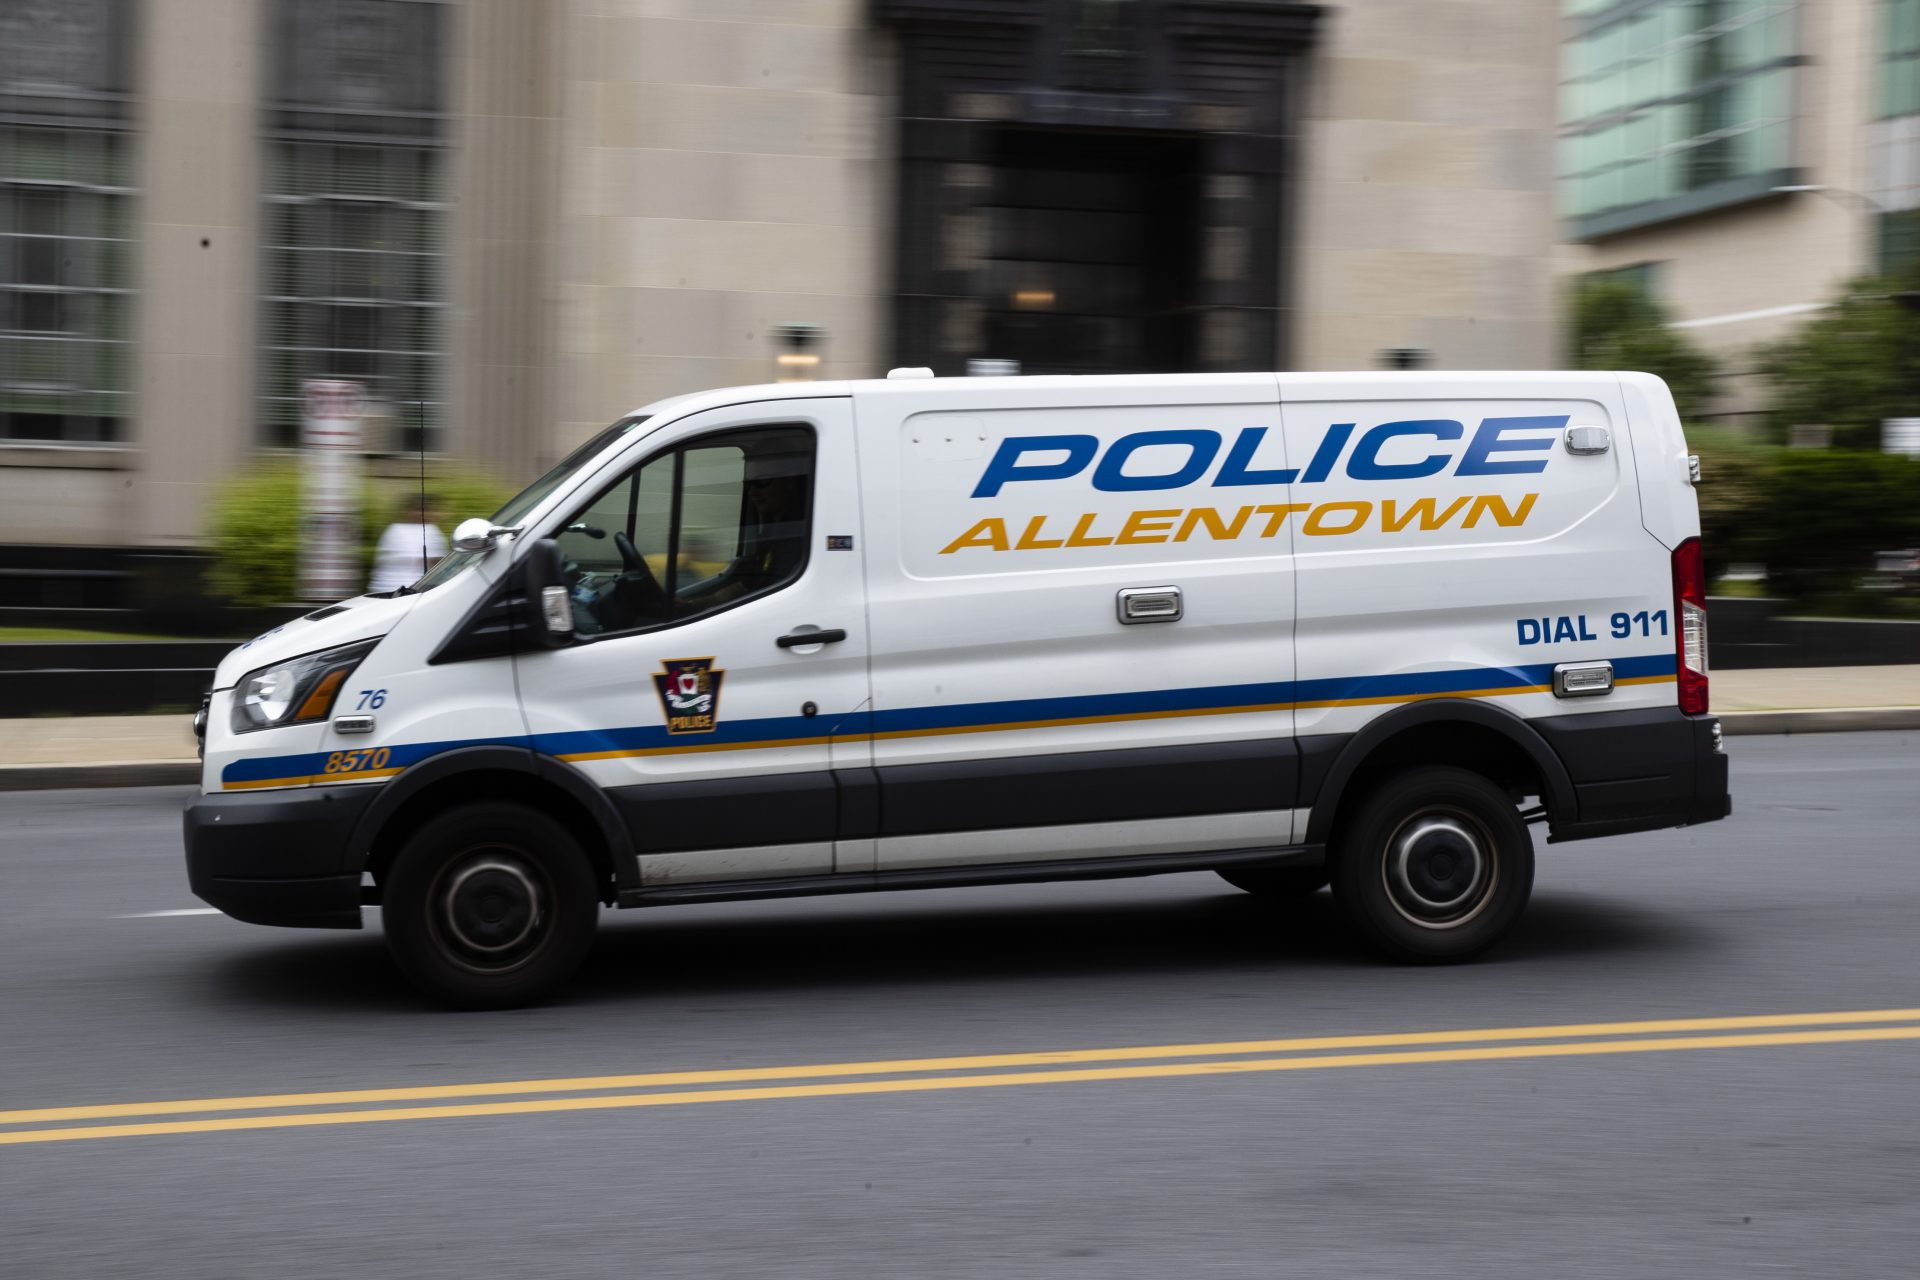 An Allentown, Pa., police van is driven near City Hall on Friday, May 29, 2020. The city furloughed as many as 87 people out of a work force of 783, and all city department chiefs were ordered to slice another 7% from their budgets, including for police, fire and emergency medical services.